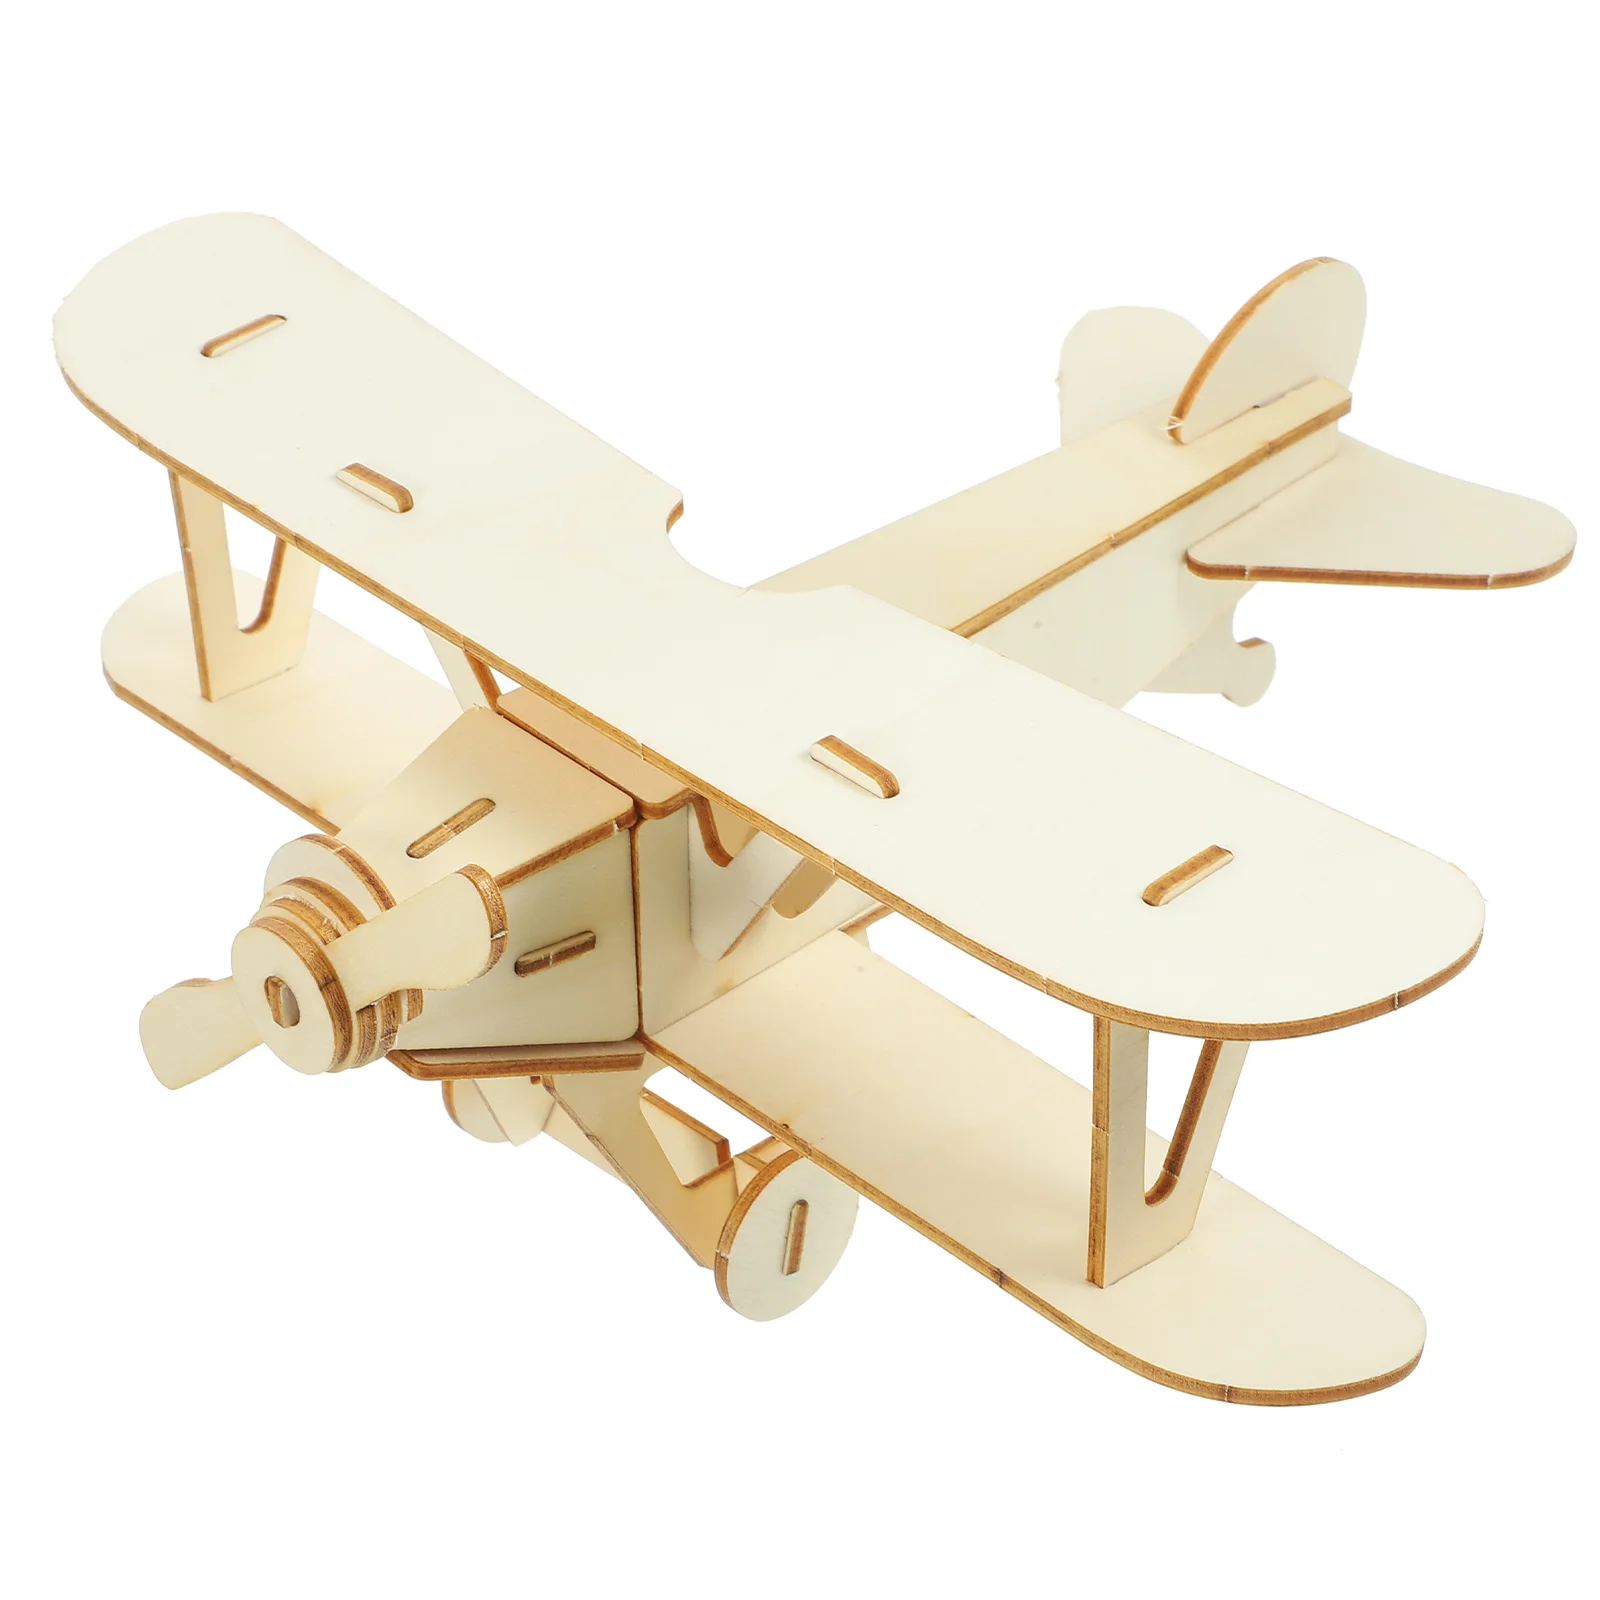 DIY Wood Toddler Foam Airplanes For Kidss Model AirToddler Foam Airplanes For Kids Wood Toddler Foam Airplanes For Kidss DIY airplane toy glider rubber band planes plane kids powered toys model airplanes flying foam kit throwing kits wood paper assemble